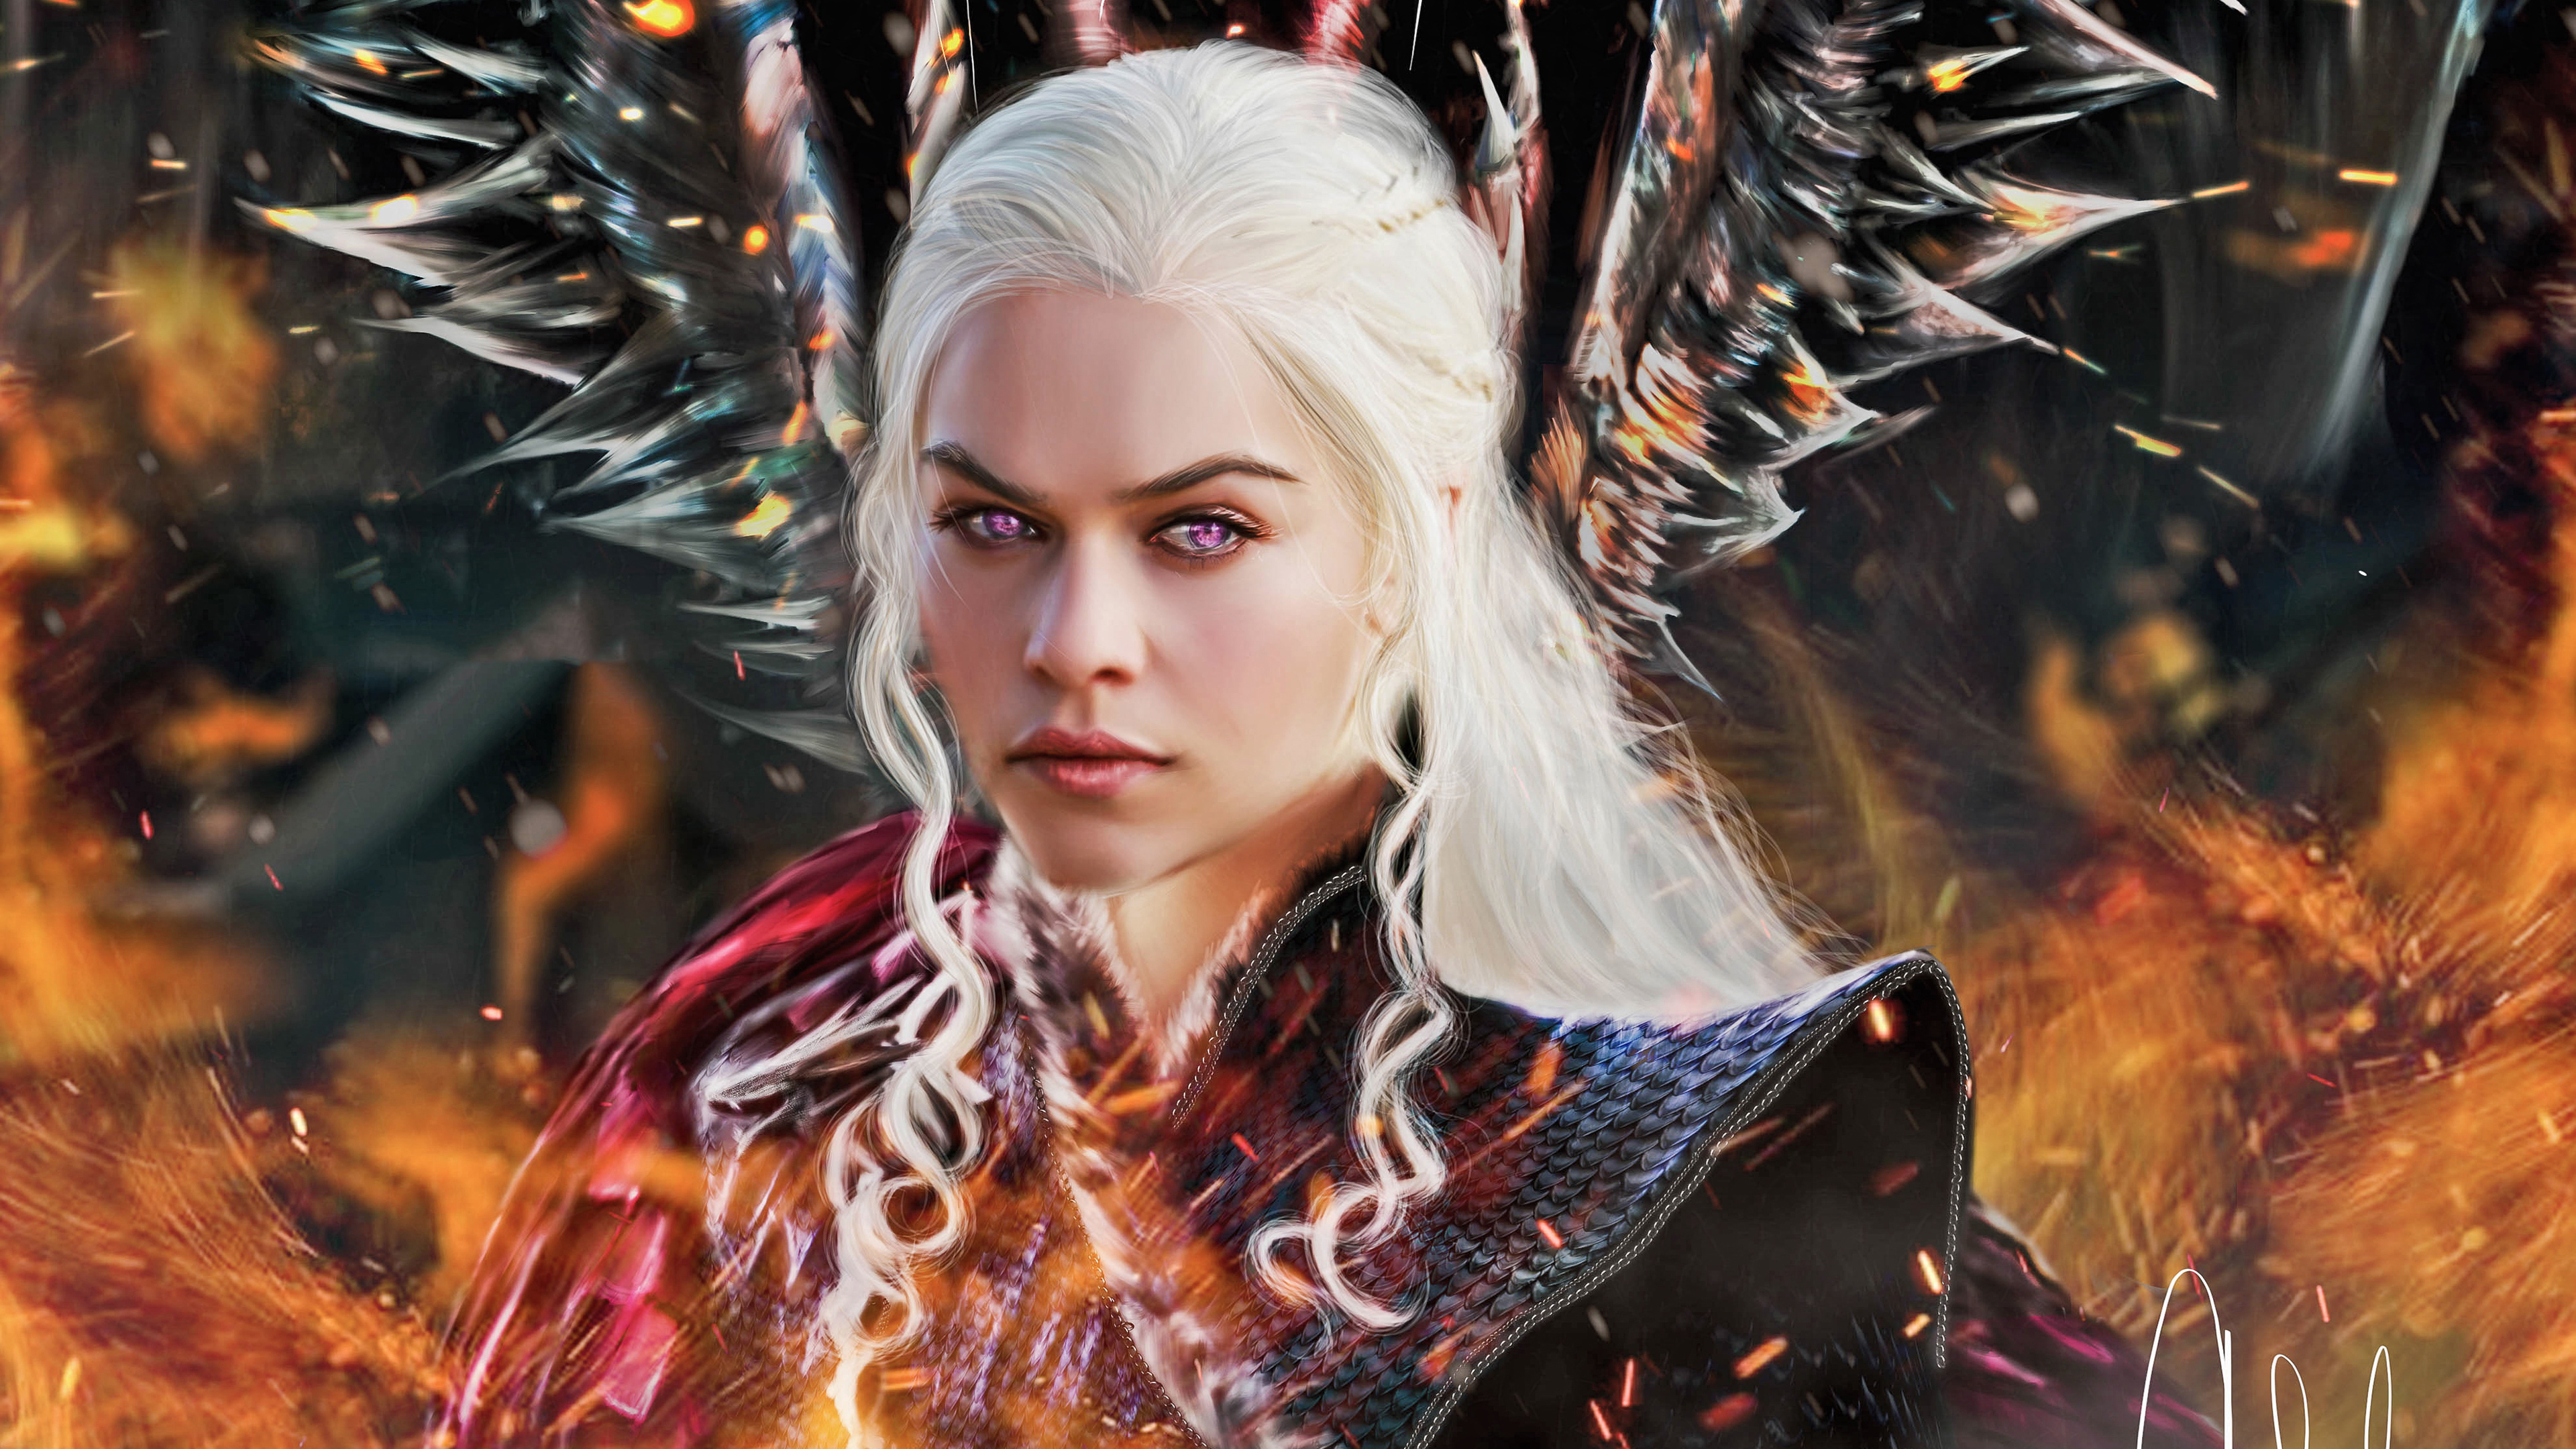 Dragon Daenerys Targaryen HD Tv Shows 4k Wallpapers Images Backgrounds  Photos and Pictures